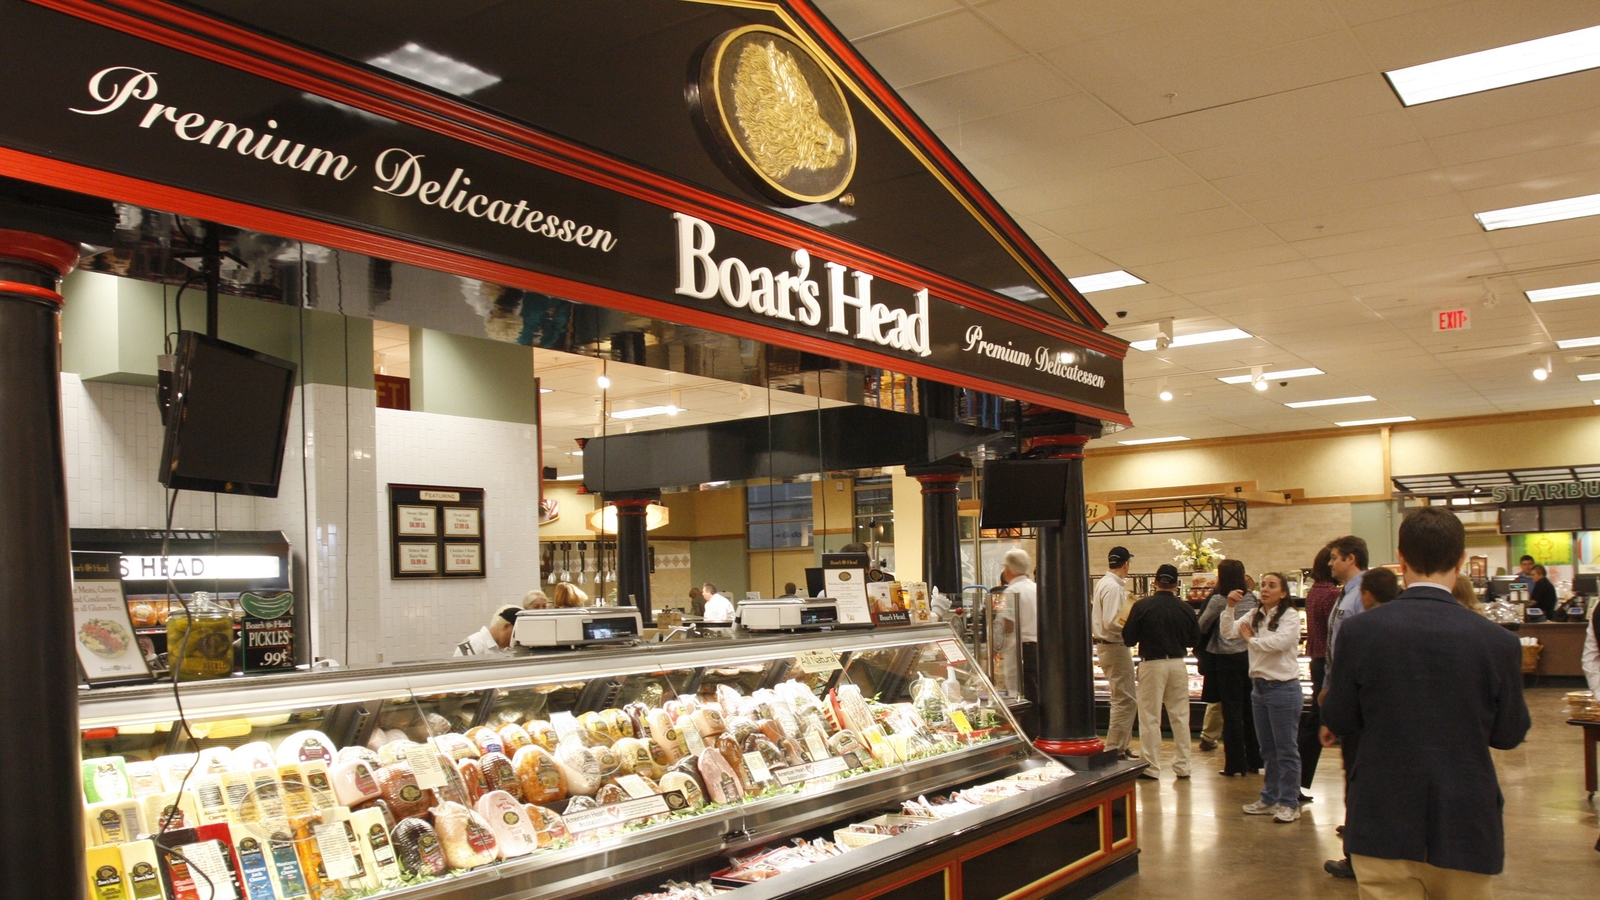 Deli meat recall: Boar’s Head ready-to-eat products recalled due to possible listeria contamination [Video]